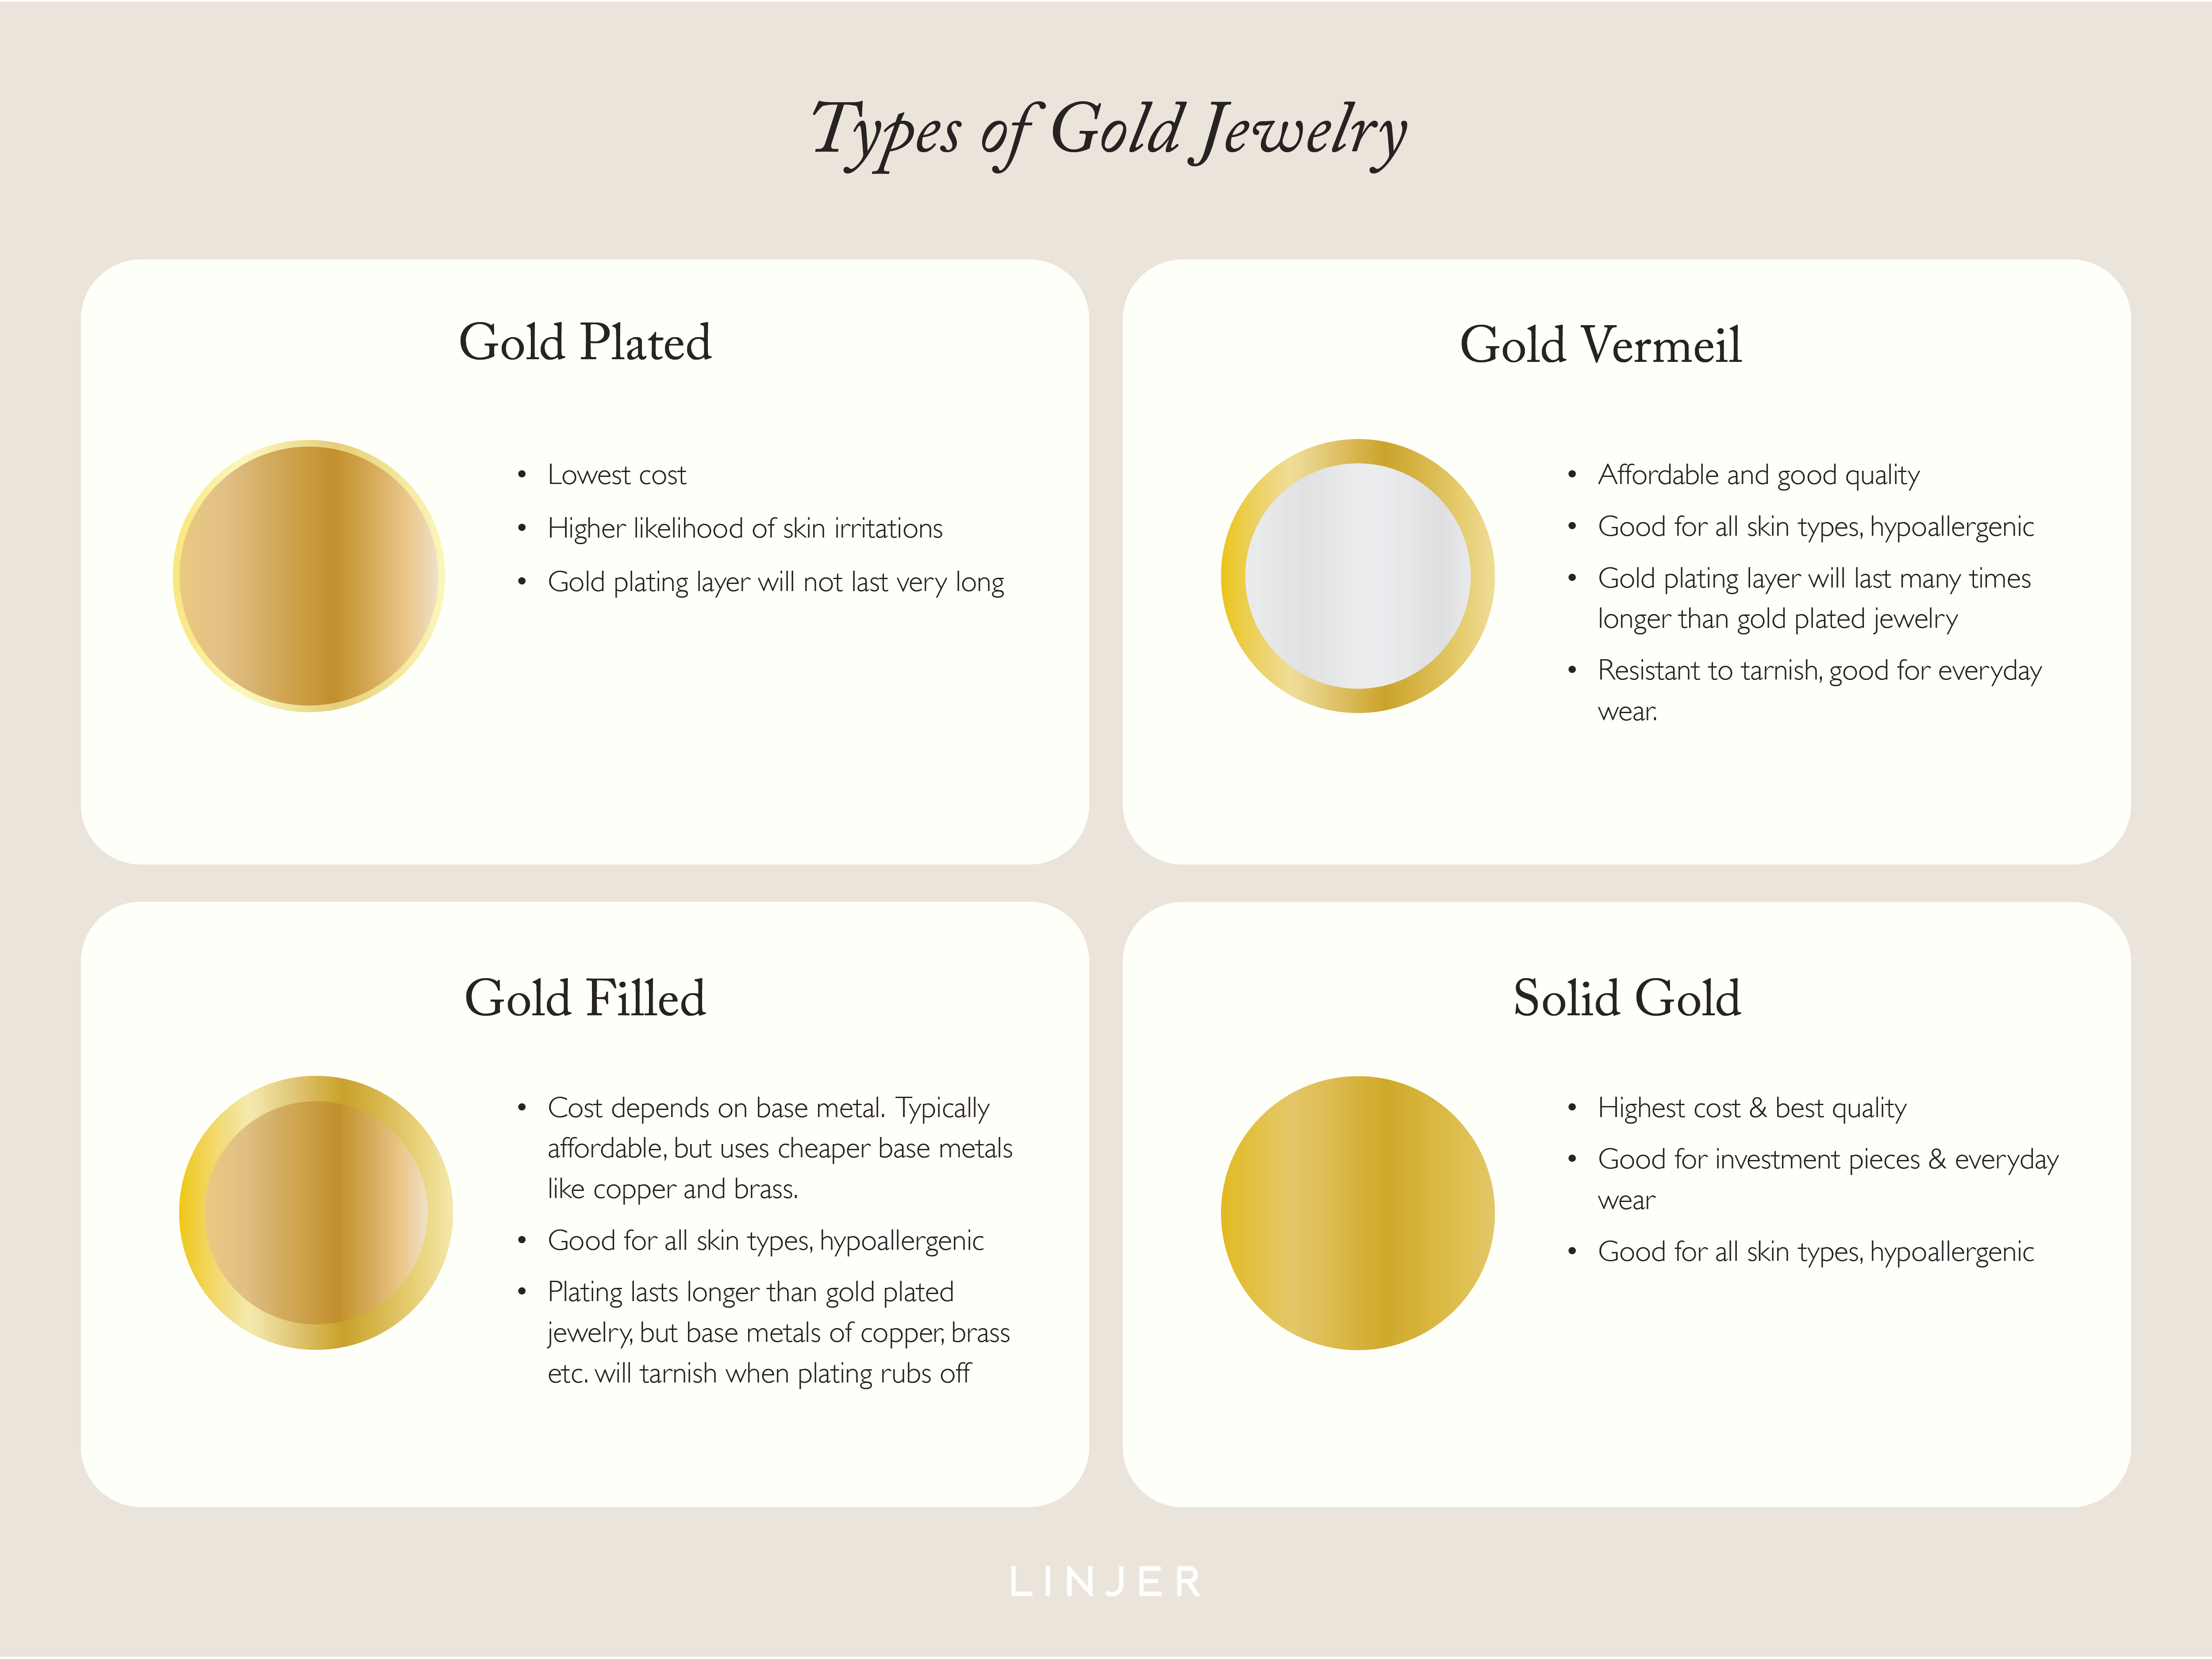 An Easy Way to Tell if Your Gold Jewelry Is Fake